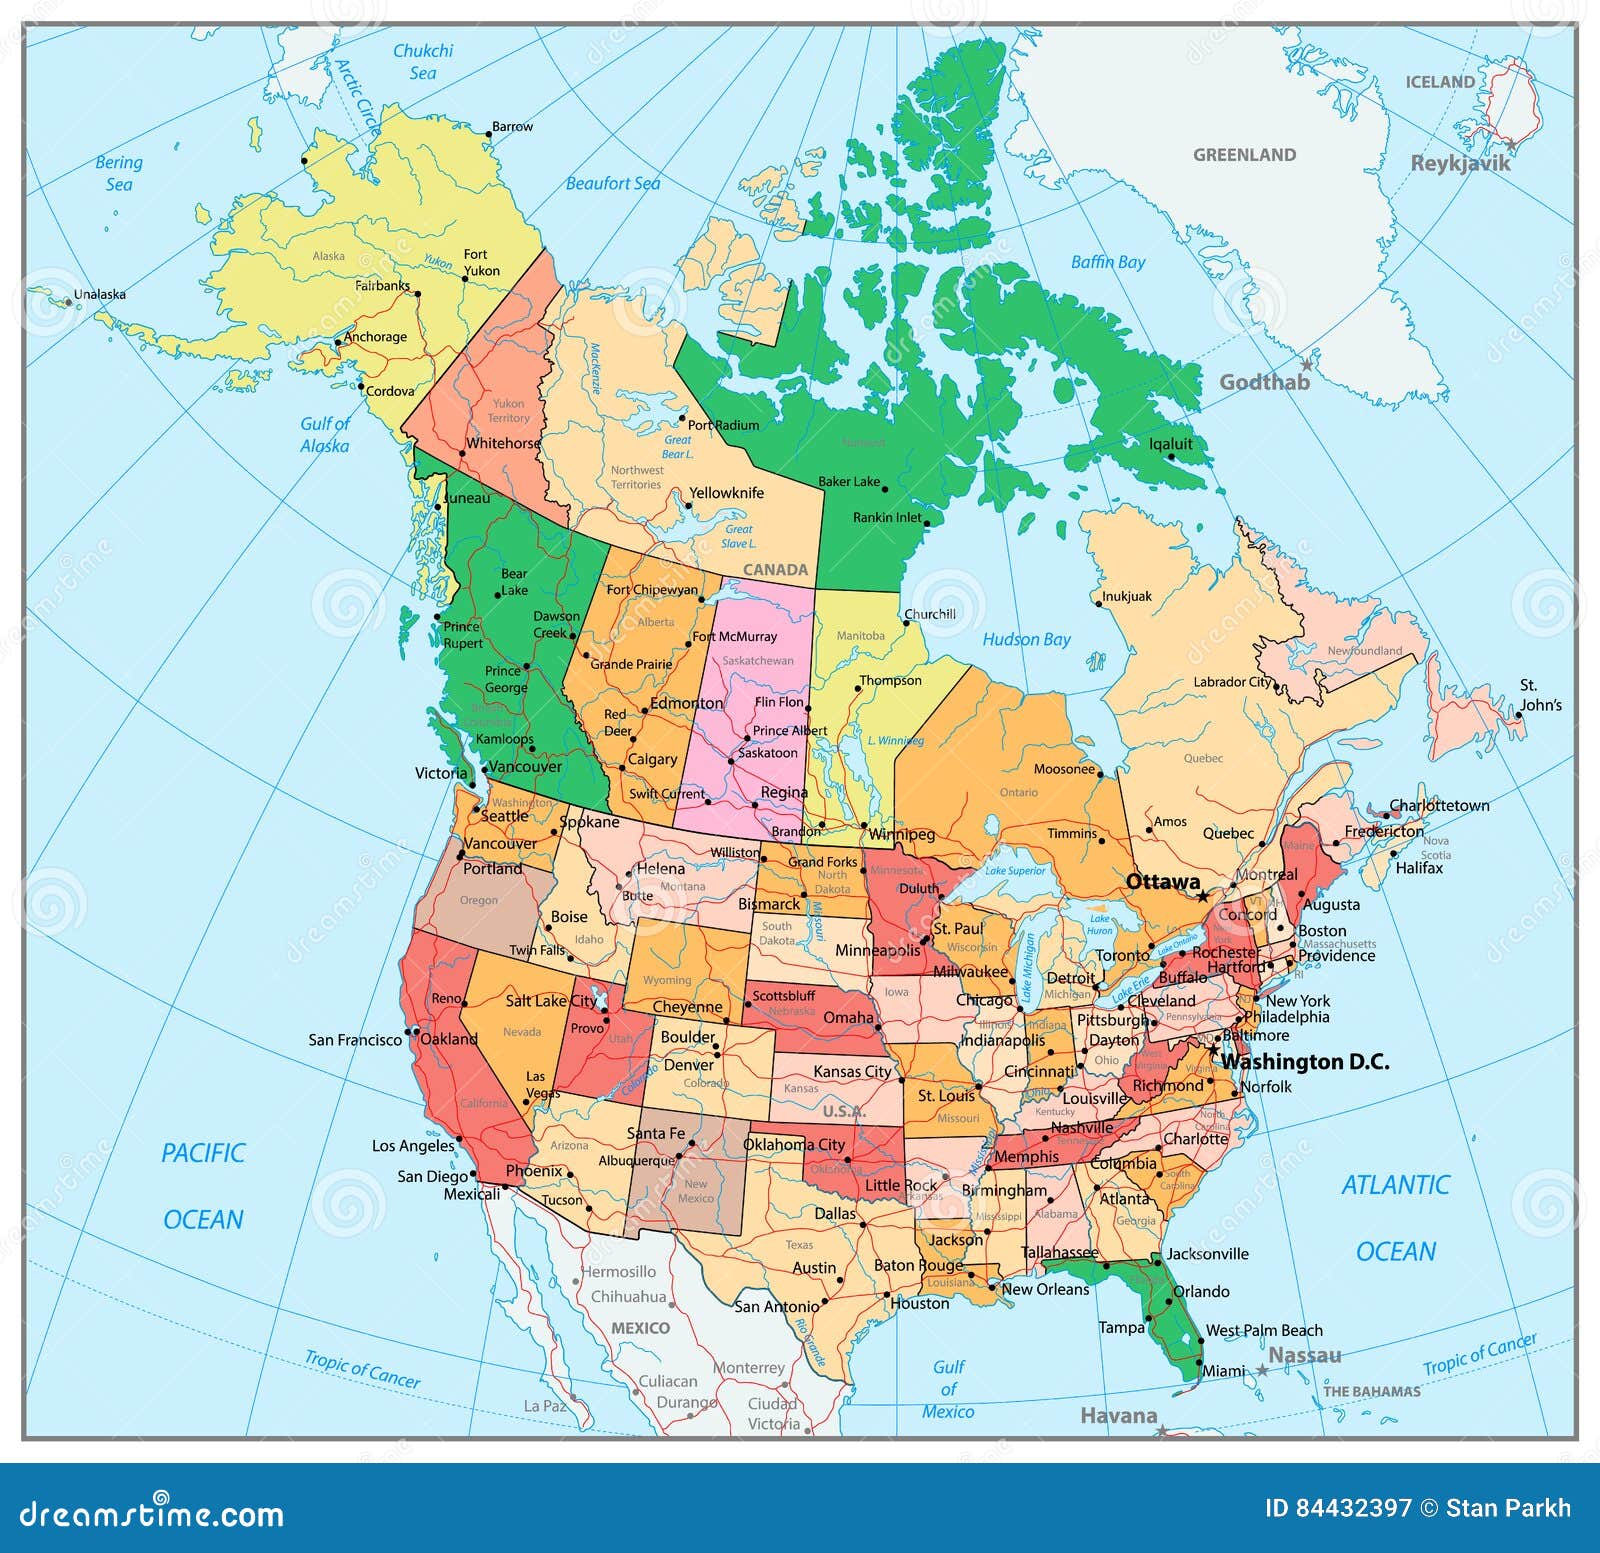 printable map of north america with states and provinces Usa And Canada Large Detailed Political Map With States Provinces printable map of north america with states and provinces